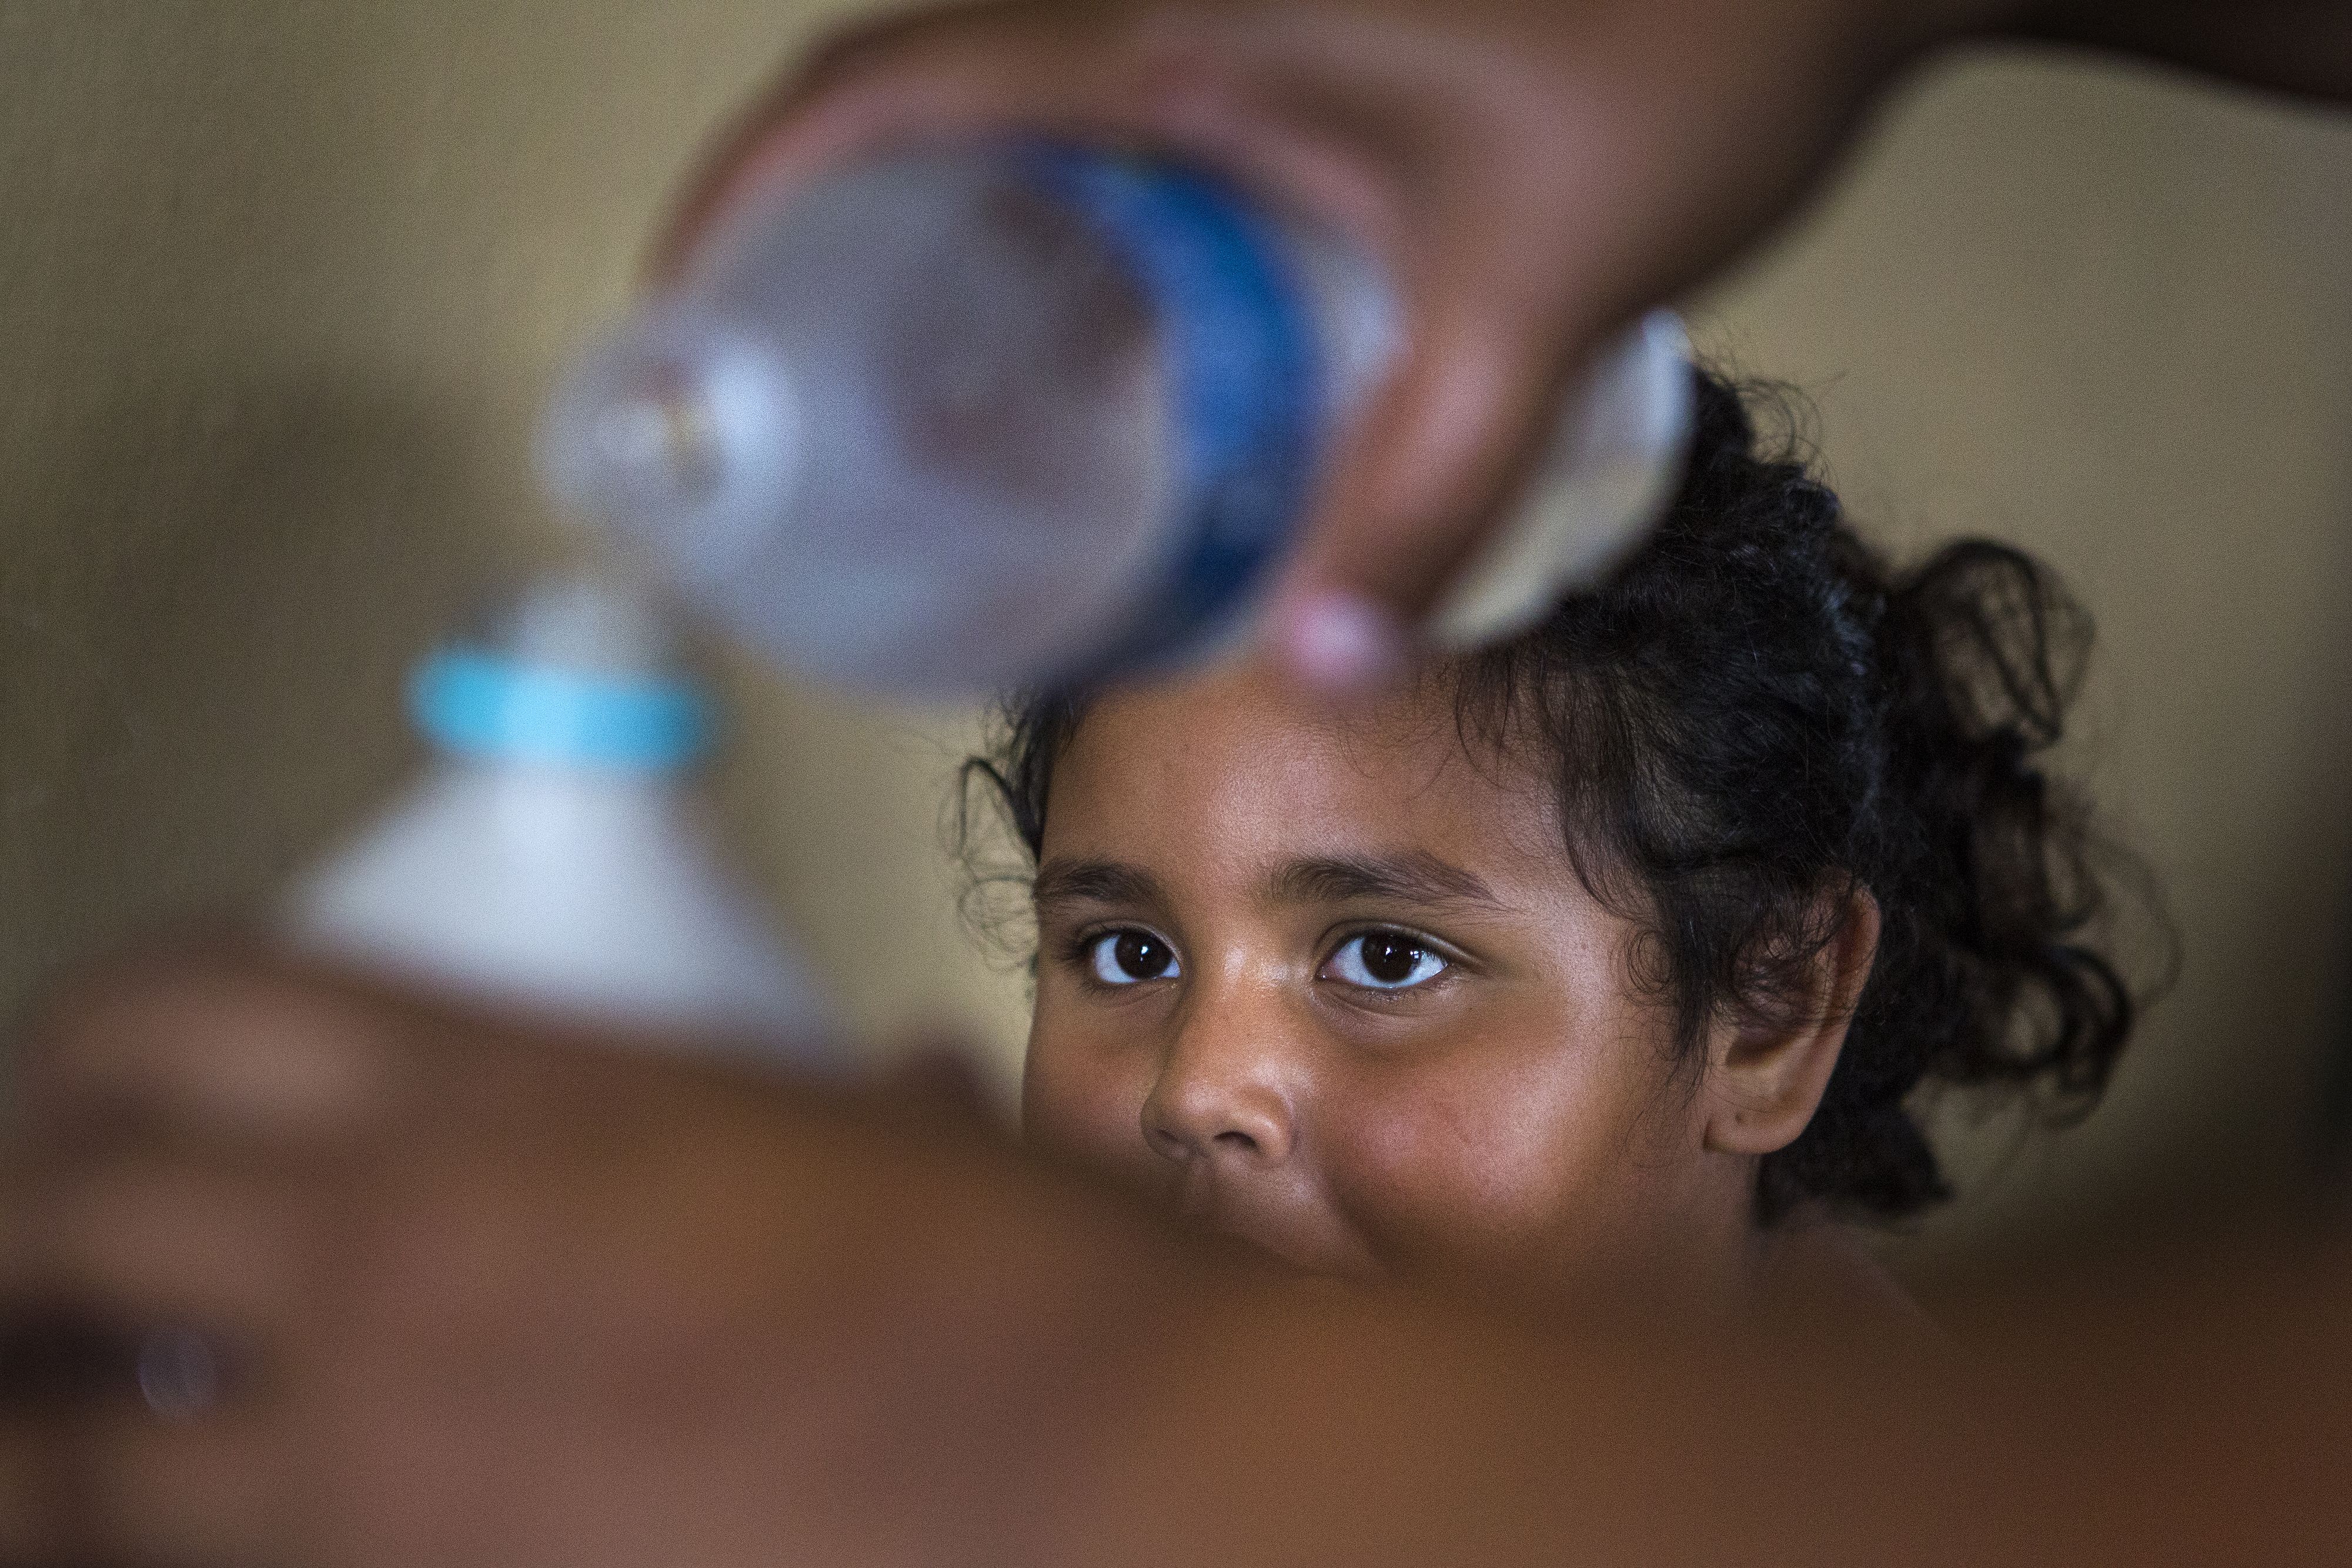 Kylia Jimenez Feliciano watches as her mother, Karen, fills a bottle with drinking water in the kitchen of the family's Aibonito home. Image by Ryan Michalesko. Puerto Rico, 2017.